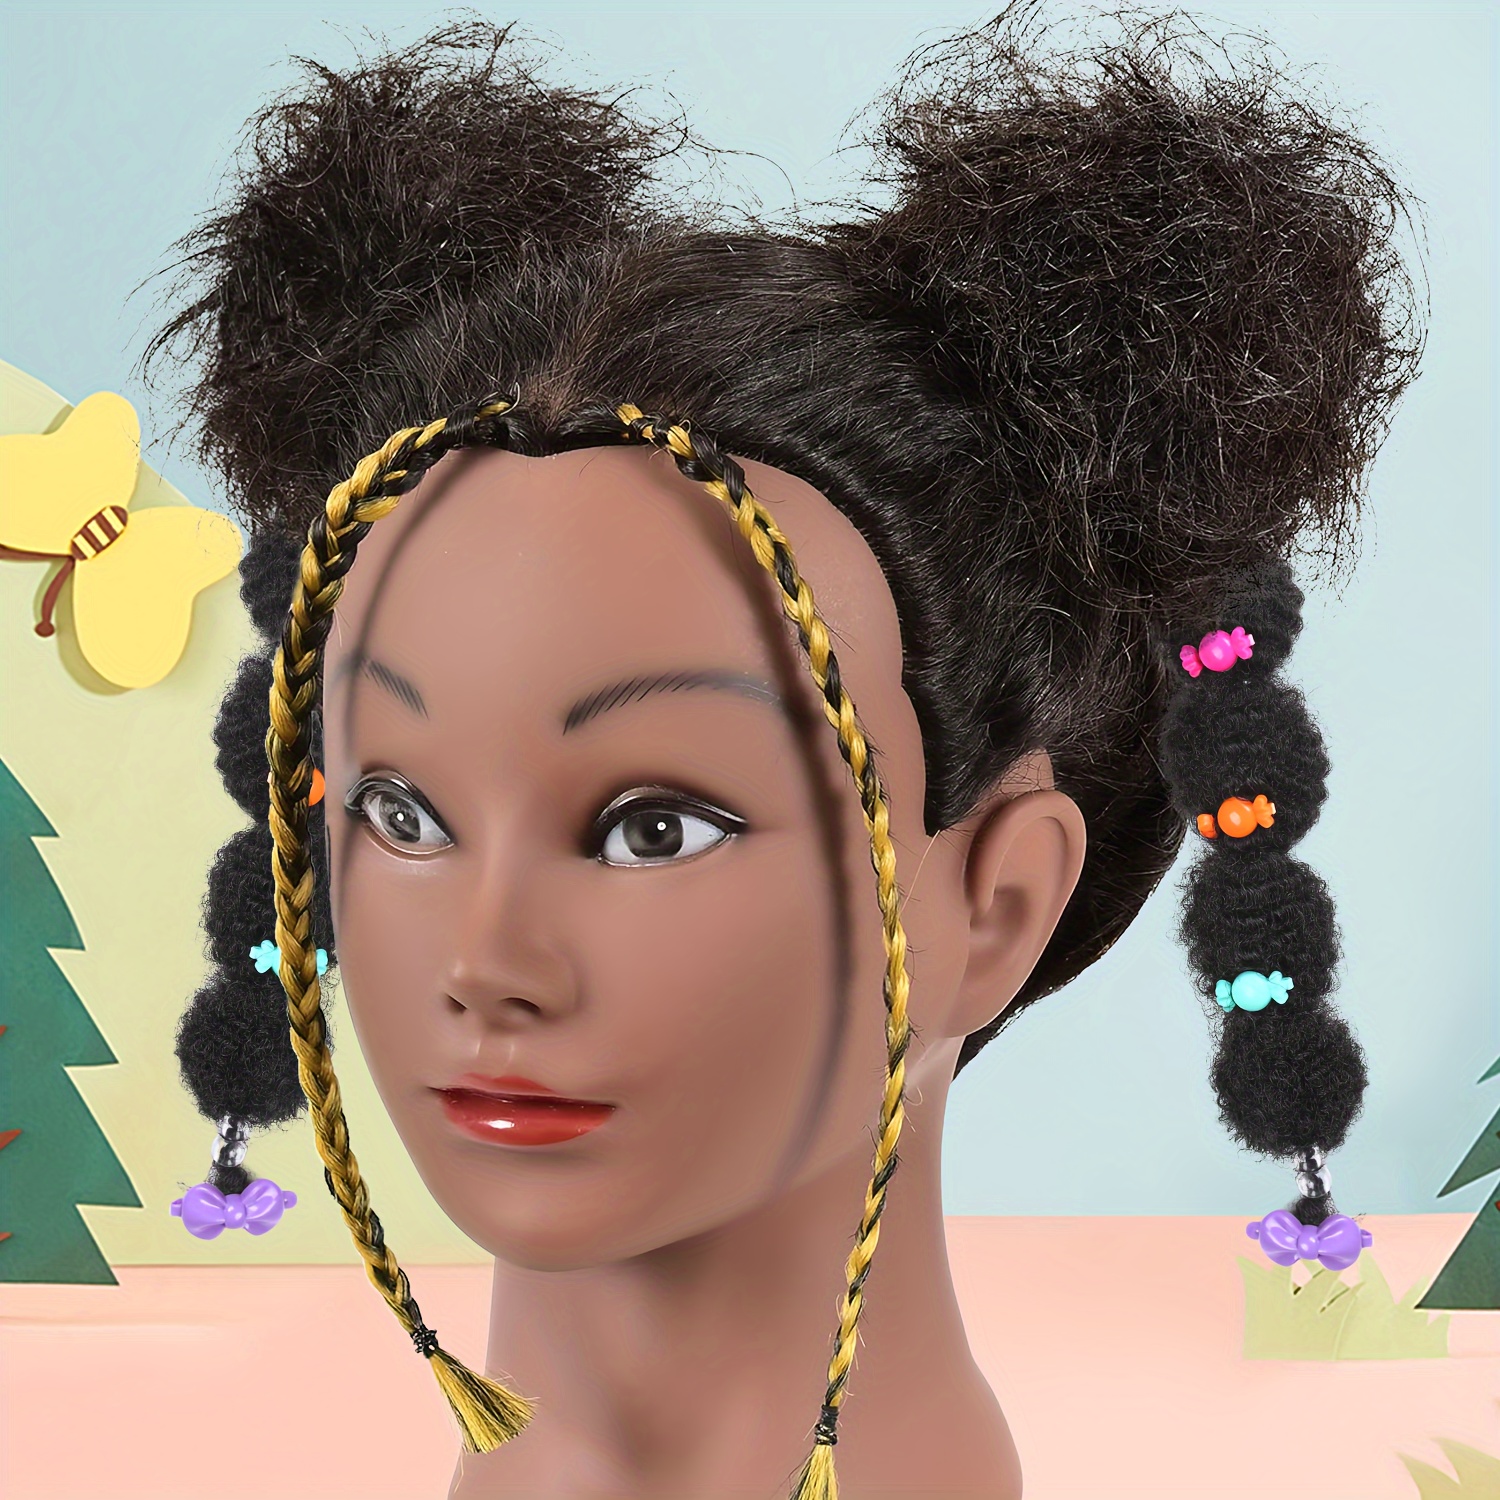 

8-12inch Afro Puff Bubble Ponytail Extension With Hair Ties Black Ponytail Bubble Ponytail Extensions Cute Clip On Afro Puff Kinky Curly Lantern Braid Synthetic Hair Pieces